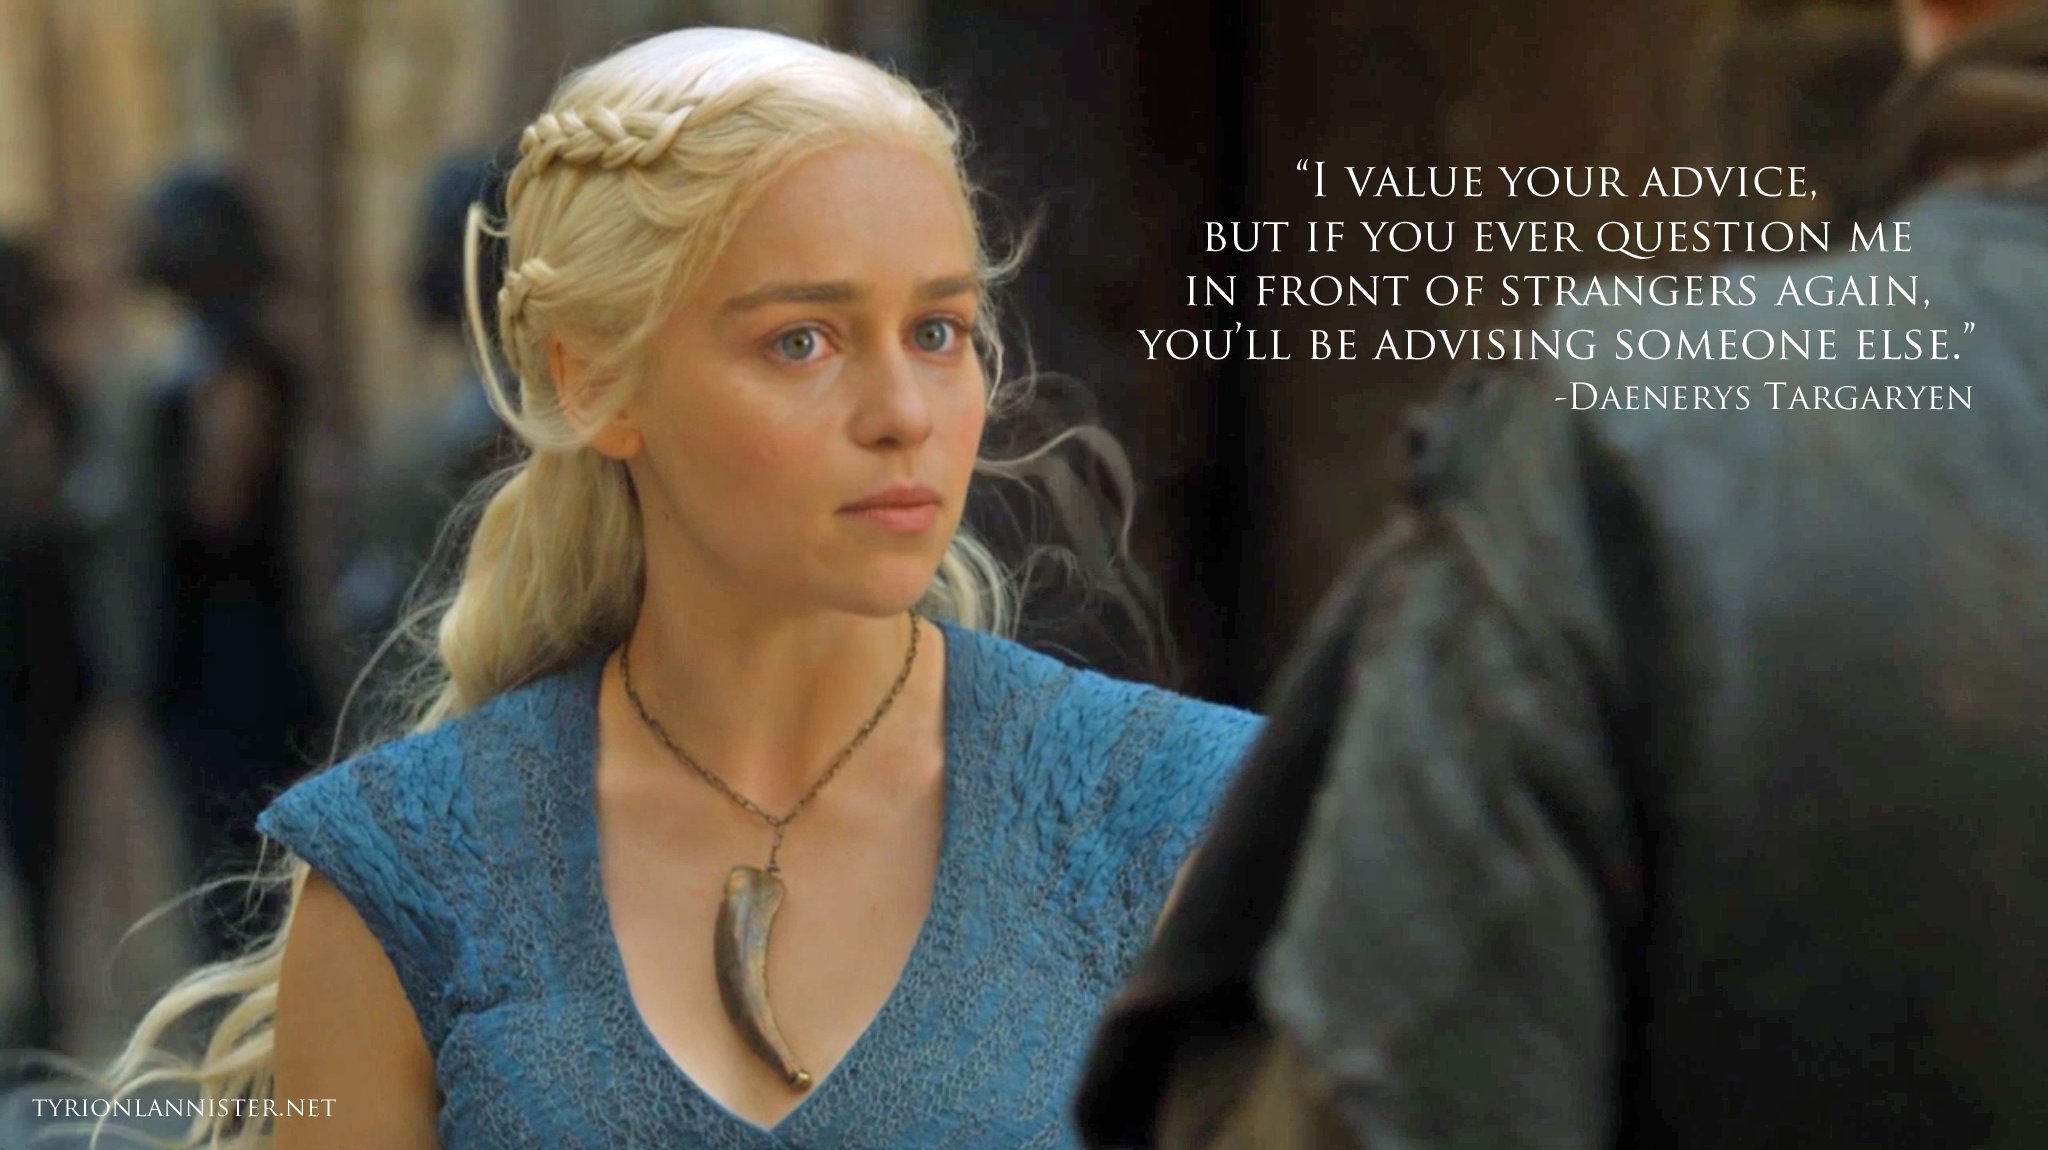 Here’s Why Daenerys Targaryen Is A Self-Obsessed Brat Who Doesn’t